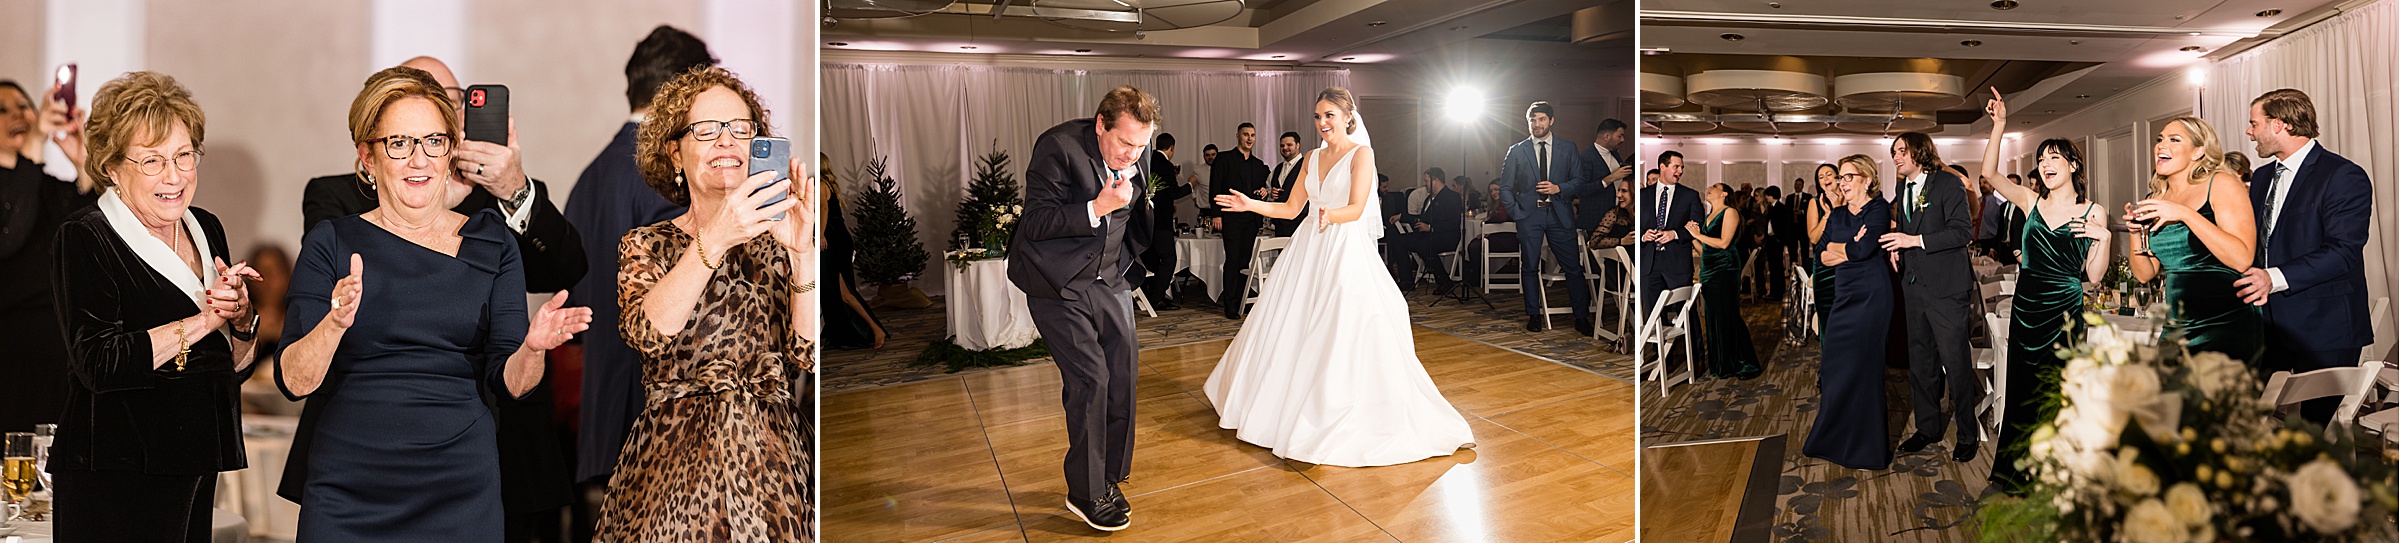 Family members record loved ones dancing at the reception; bride dances and laughs with loved on at the dance floor; bridal party and guests enjoy watching others on the dance floor at the H Hotel by Detroit Wedding Photographer Michele Maloney 